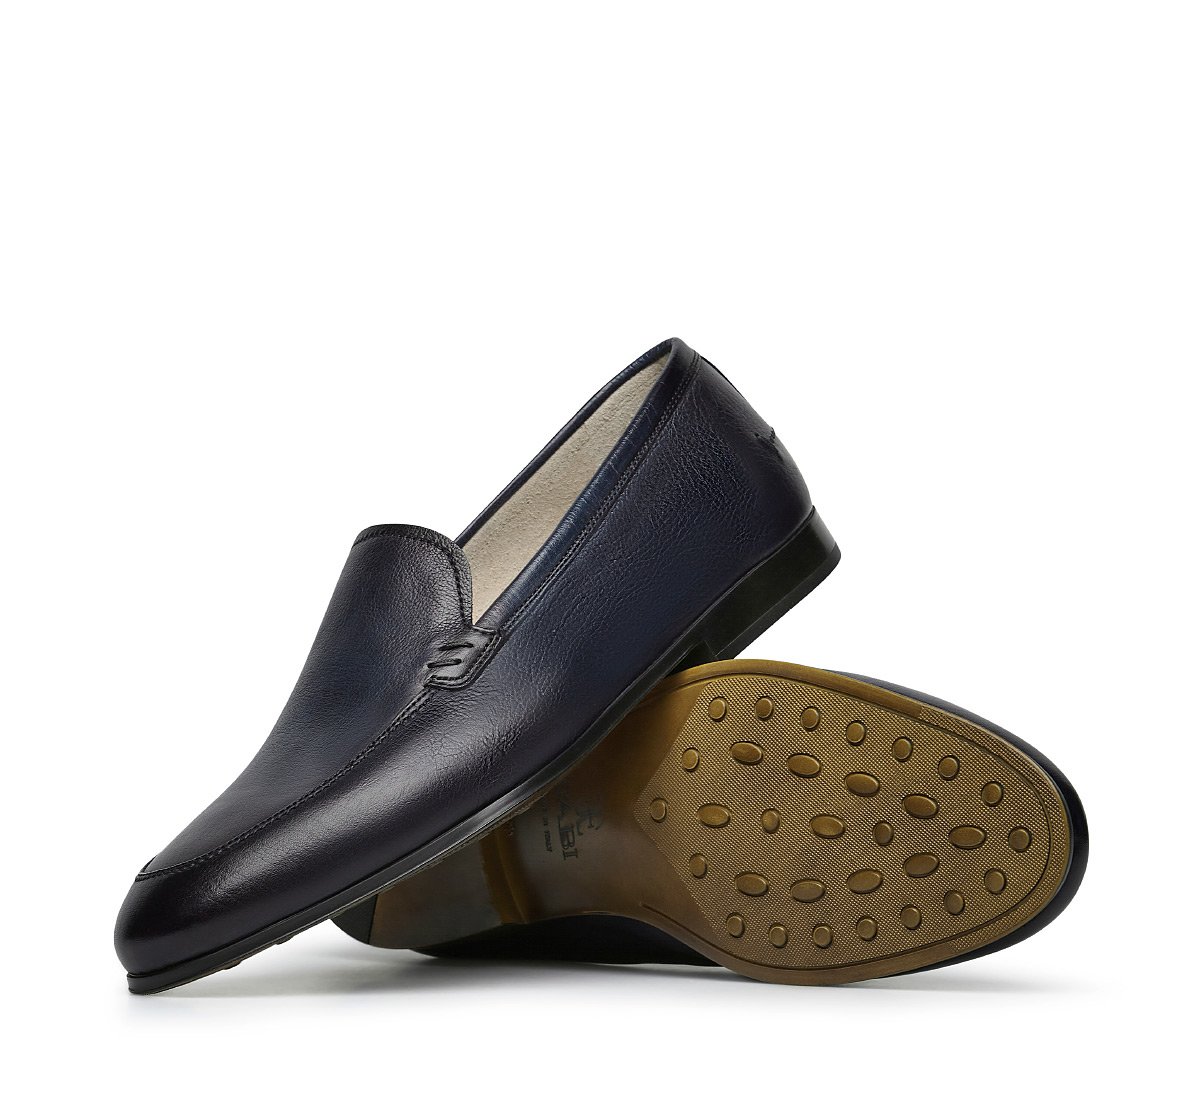 Nappa leather loafer